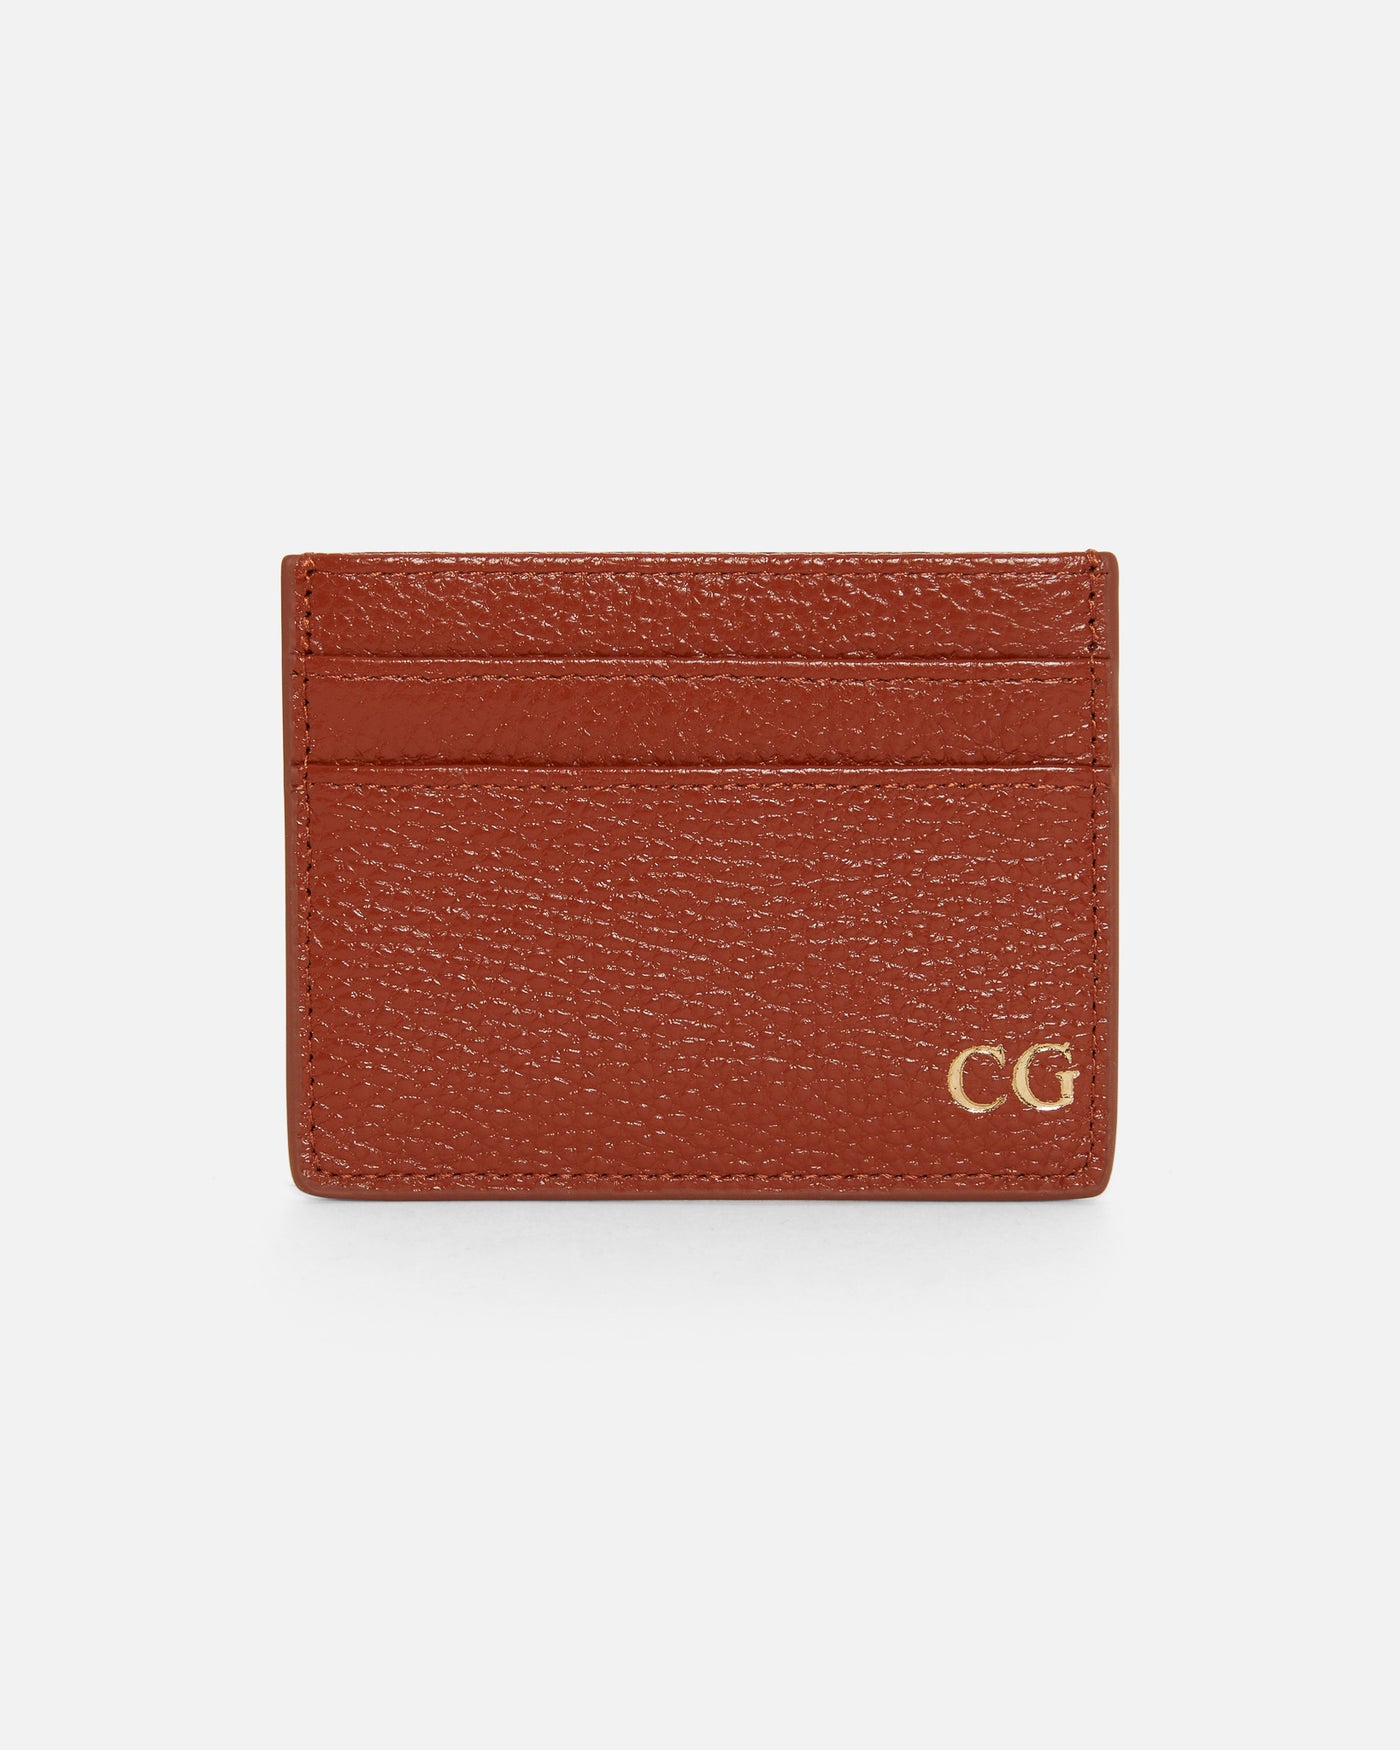 tan pebble leather card holder embossed with initials